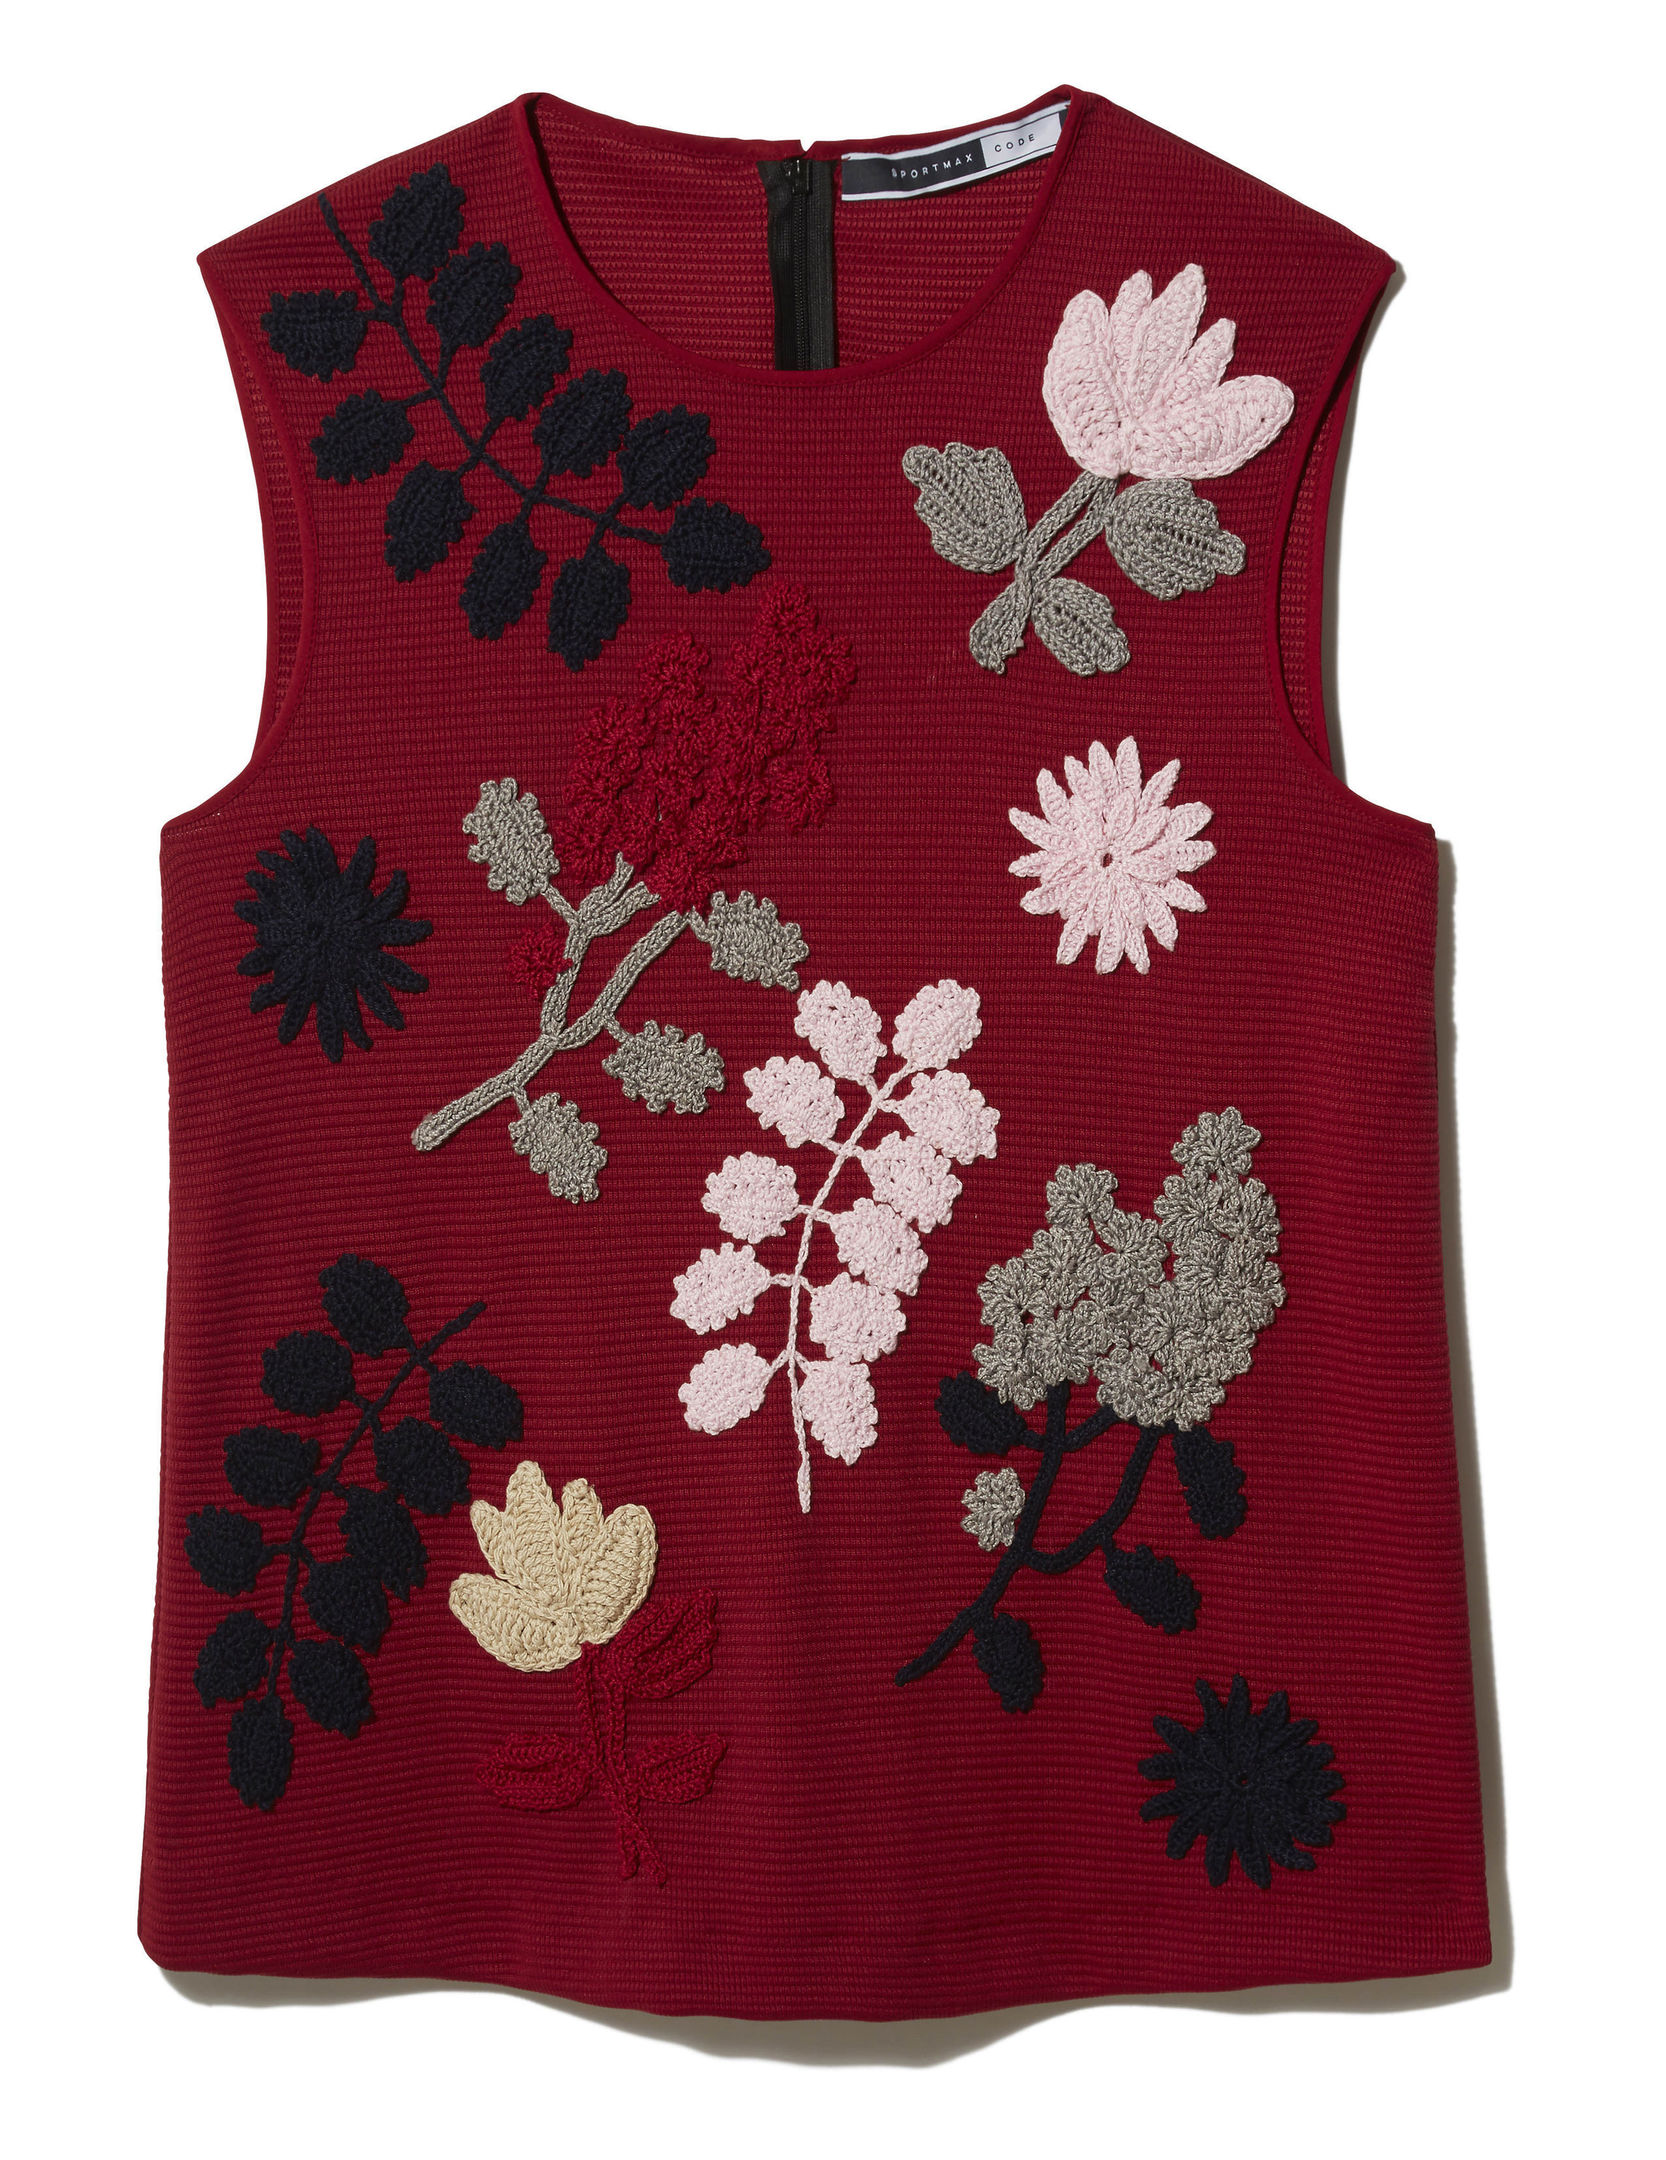 Sportmax Code Fiacre Sleeveless Ribbed Floral Top, available from houseoffraser.co.uk. 